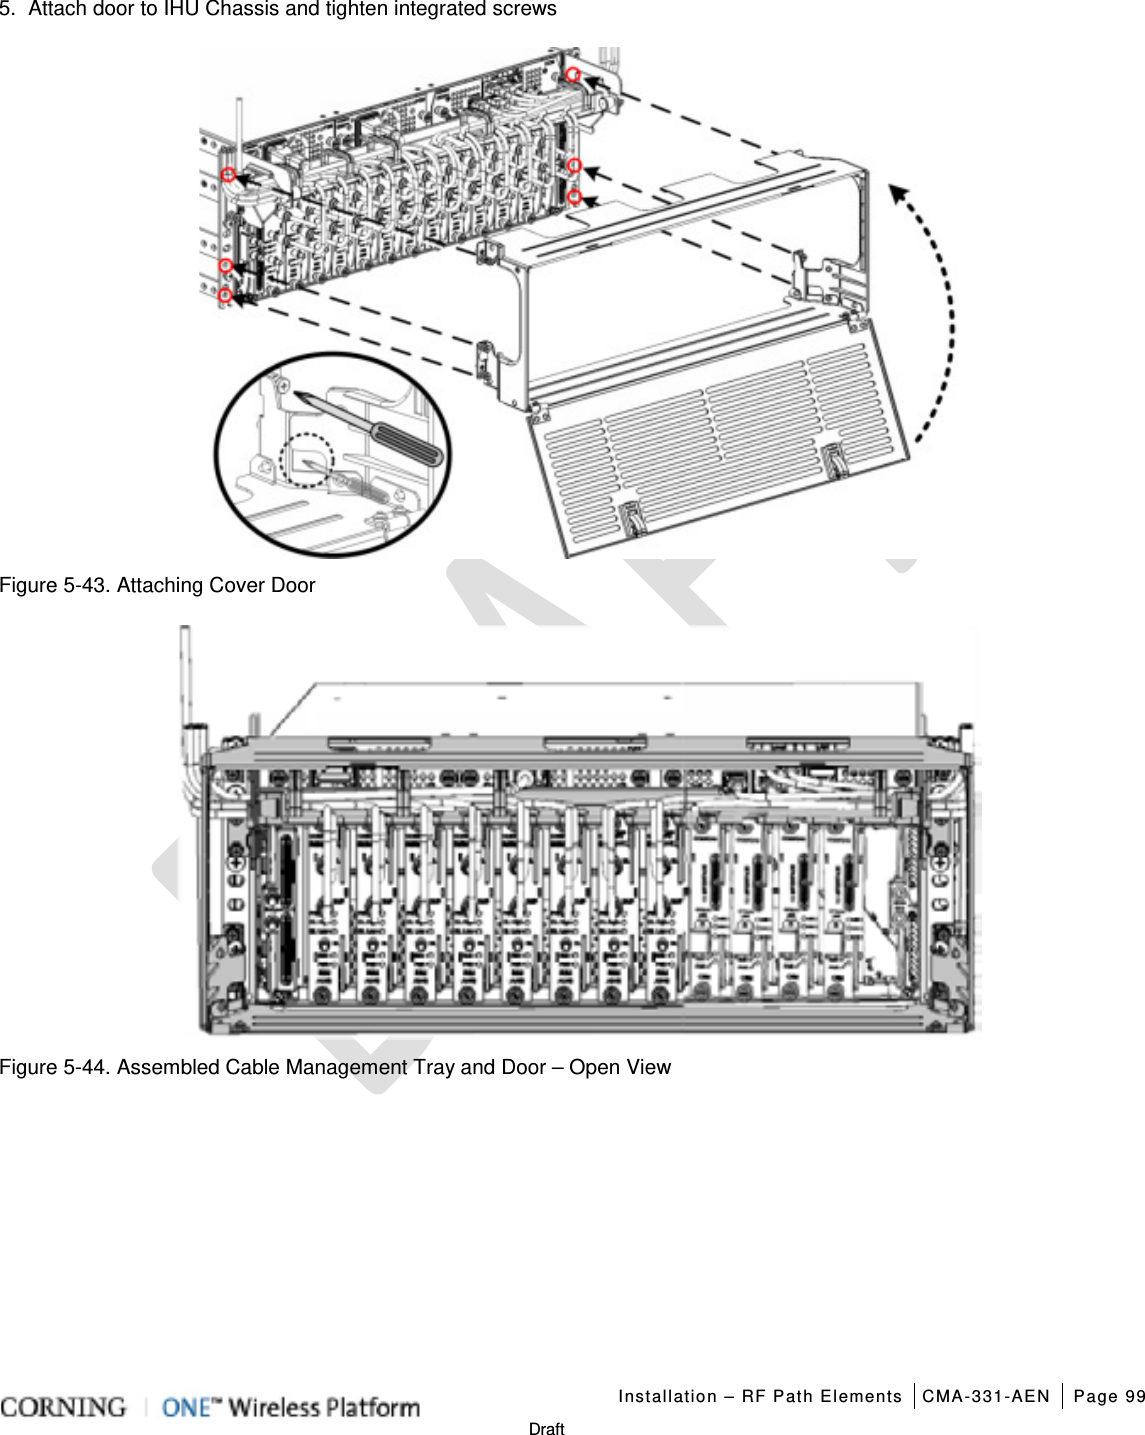   Installation – RF Path Elements CMA-331-AEN Page 99   Draft 5.  Attach door to IHU Chassis and tighten integrated screws  Figure  5-43. Attaching Cover Door  Figure  5-44. Assembled Cable Management Tray and Door – Open View 